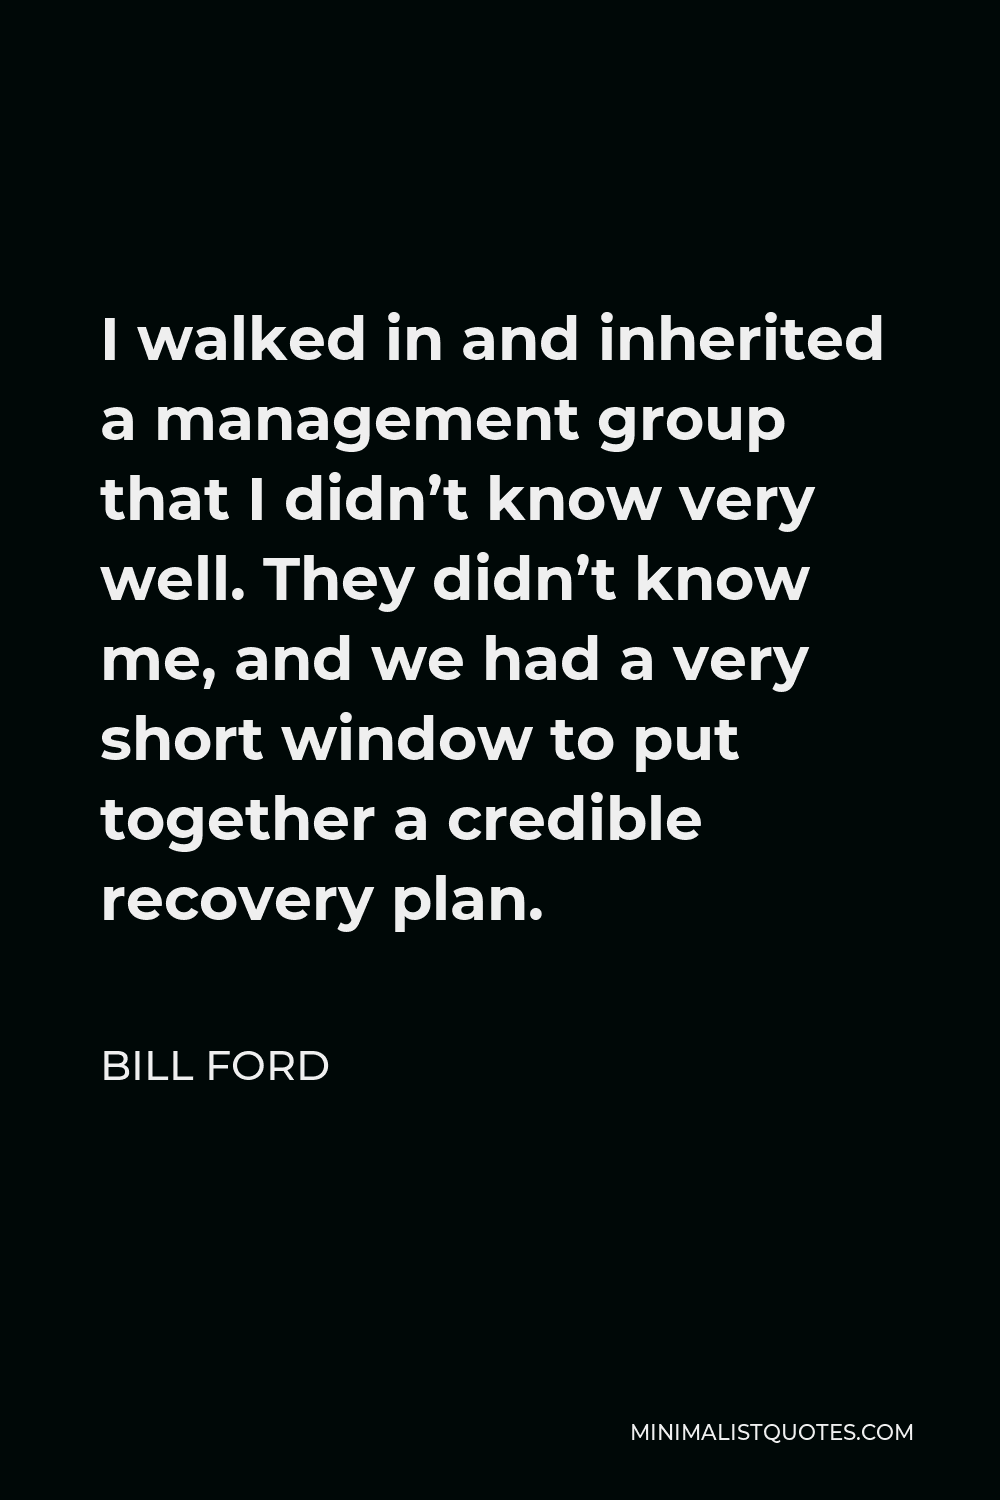 Bill Ford Quote - I walked in and inherited a management group that I didn’t know very well. They didn’t know me, and we had a very short window to put together a credible recovery plan.